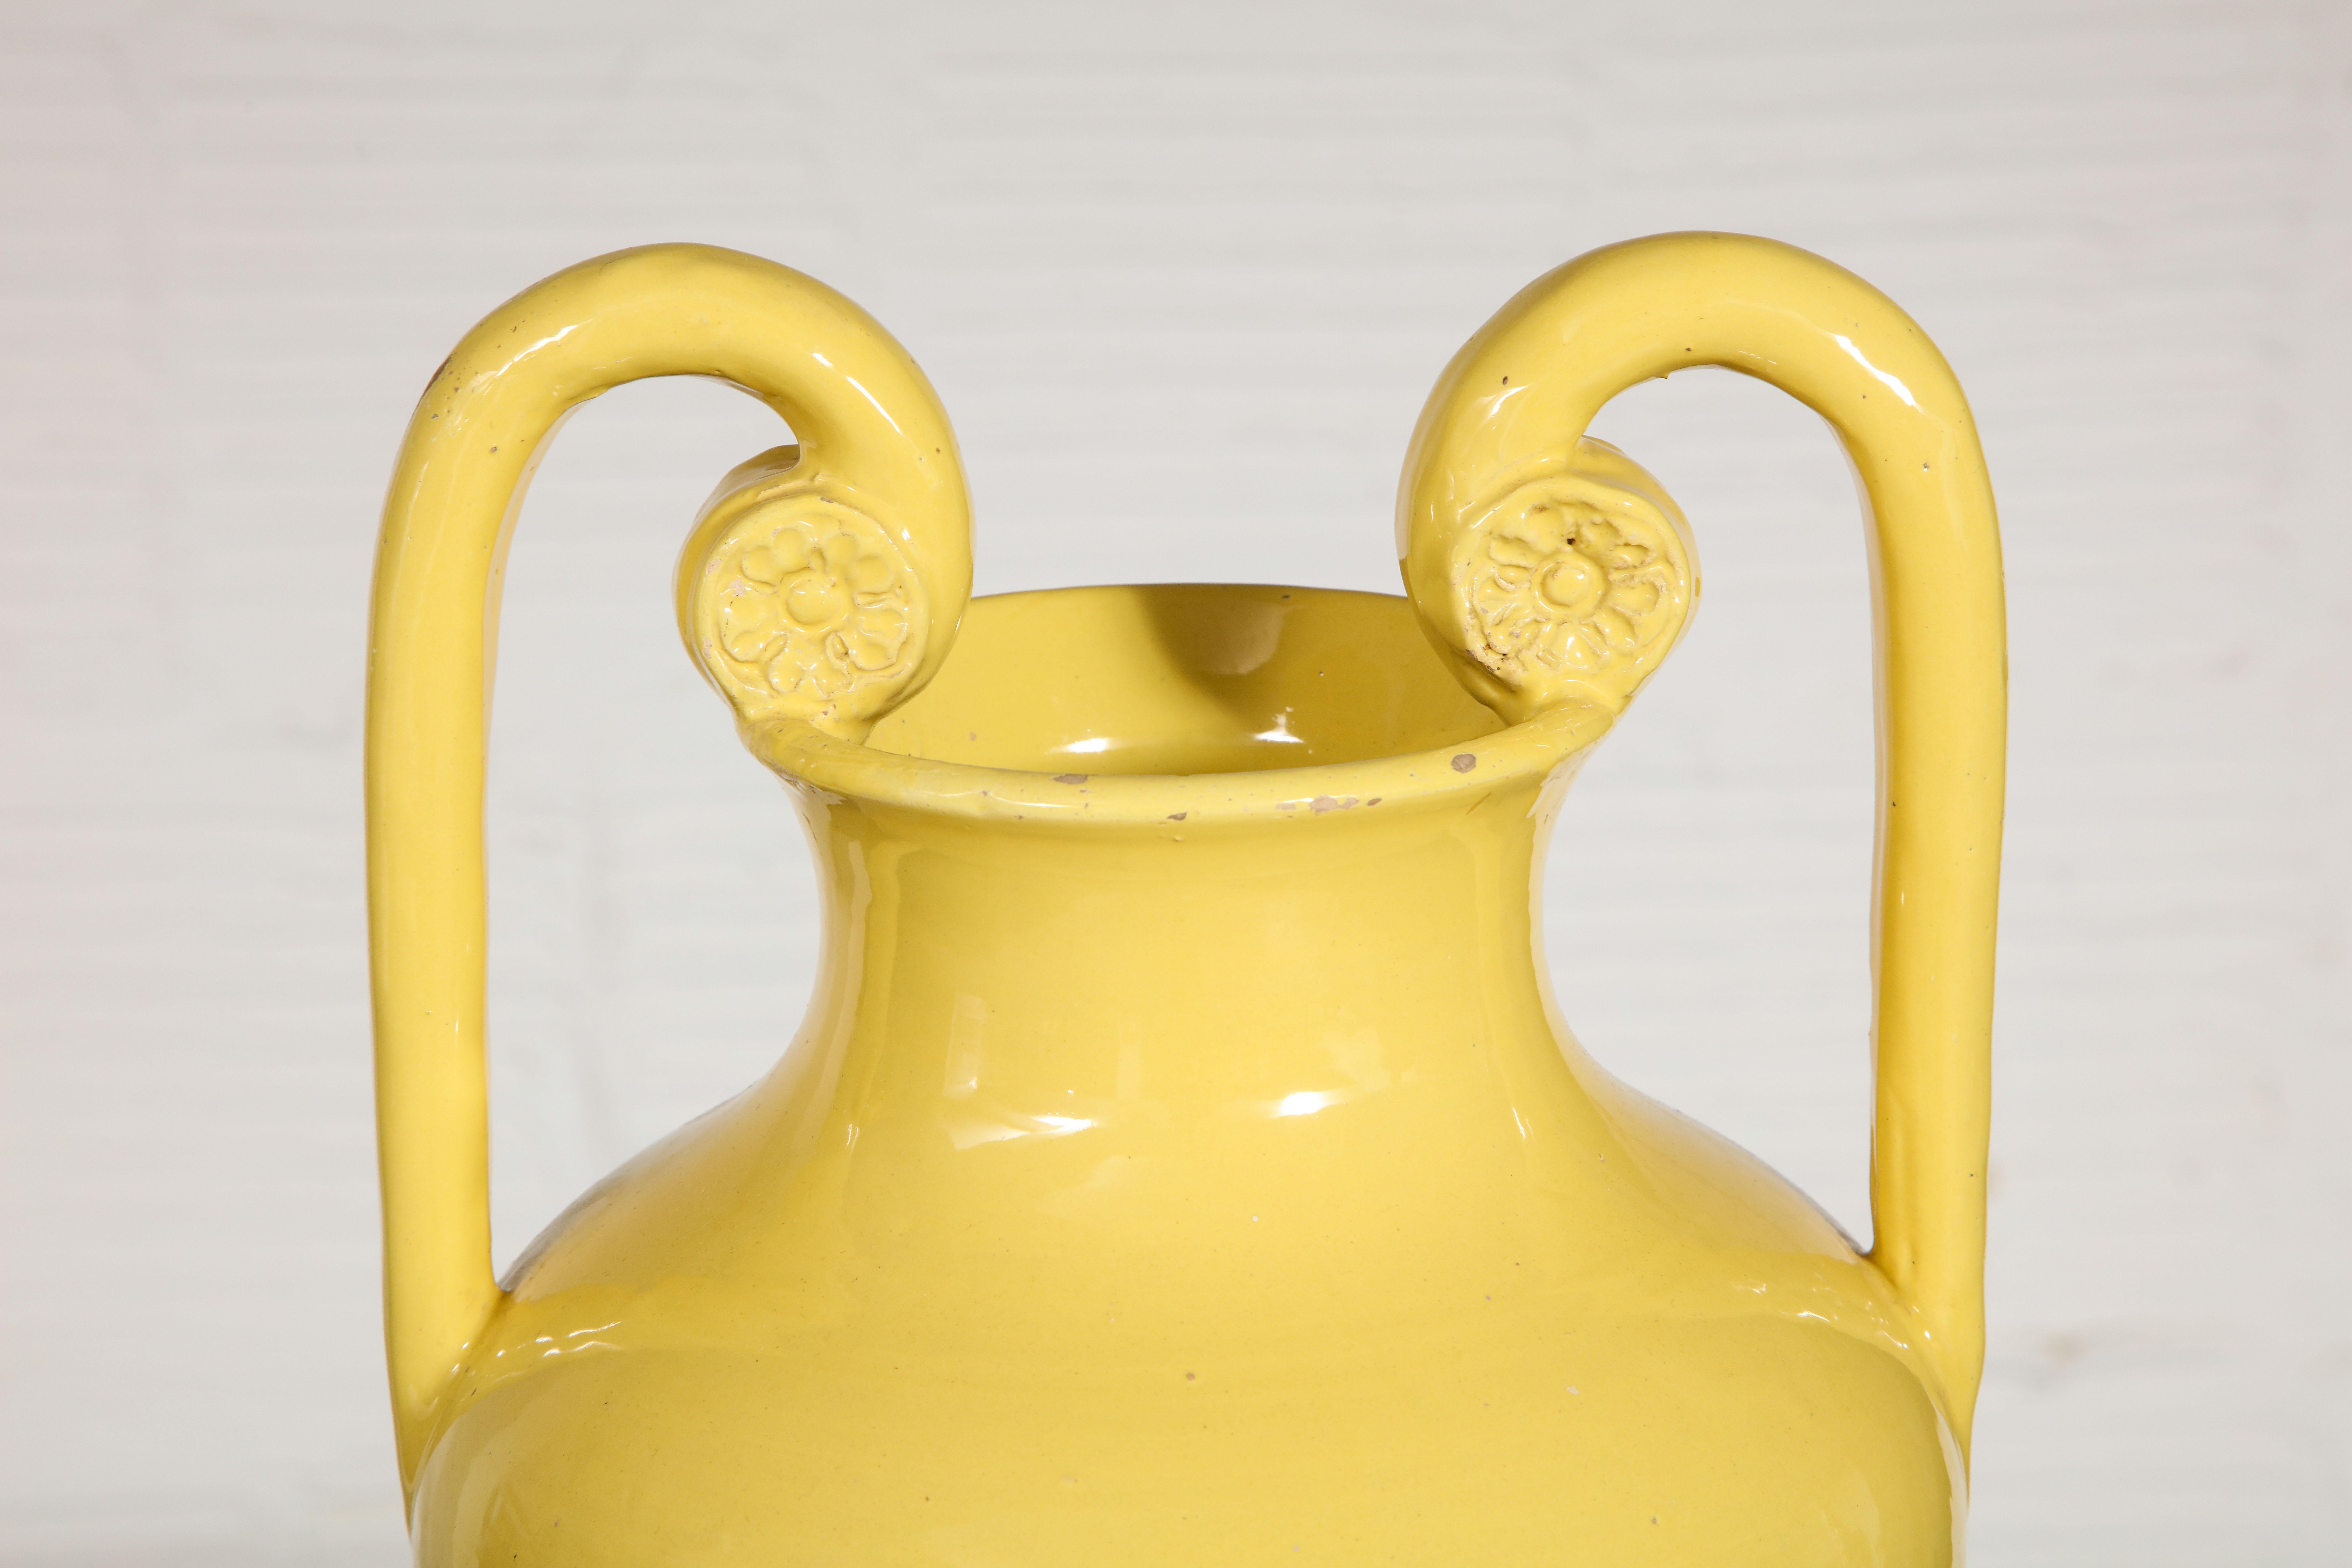 Earthenware vase of neoclassical form glazed a striking yellow. Marked Italia to underside.